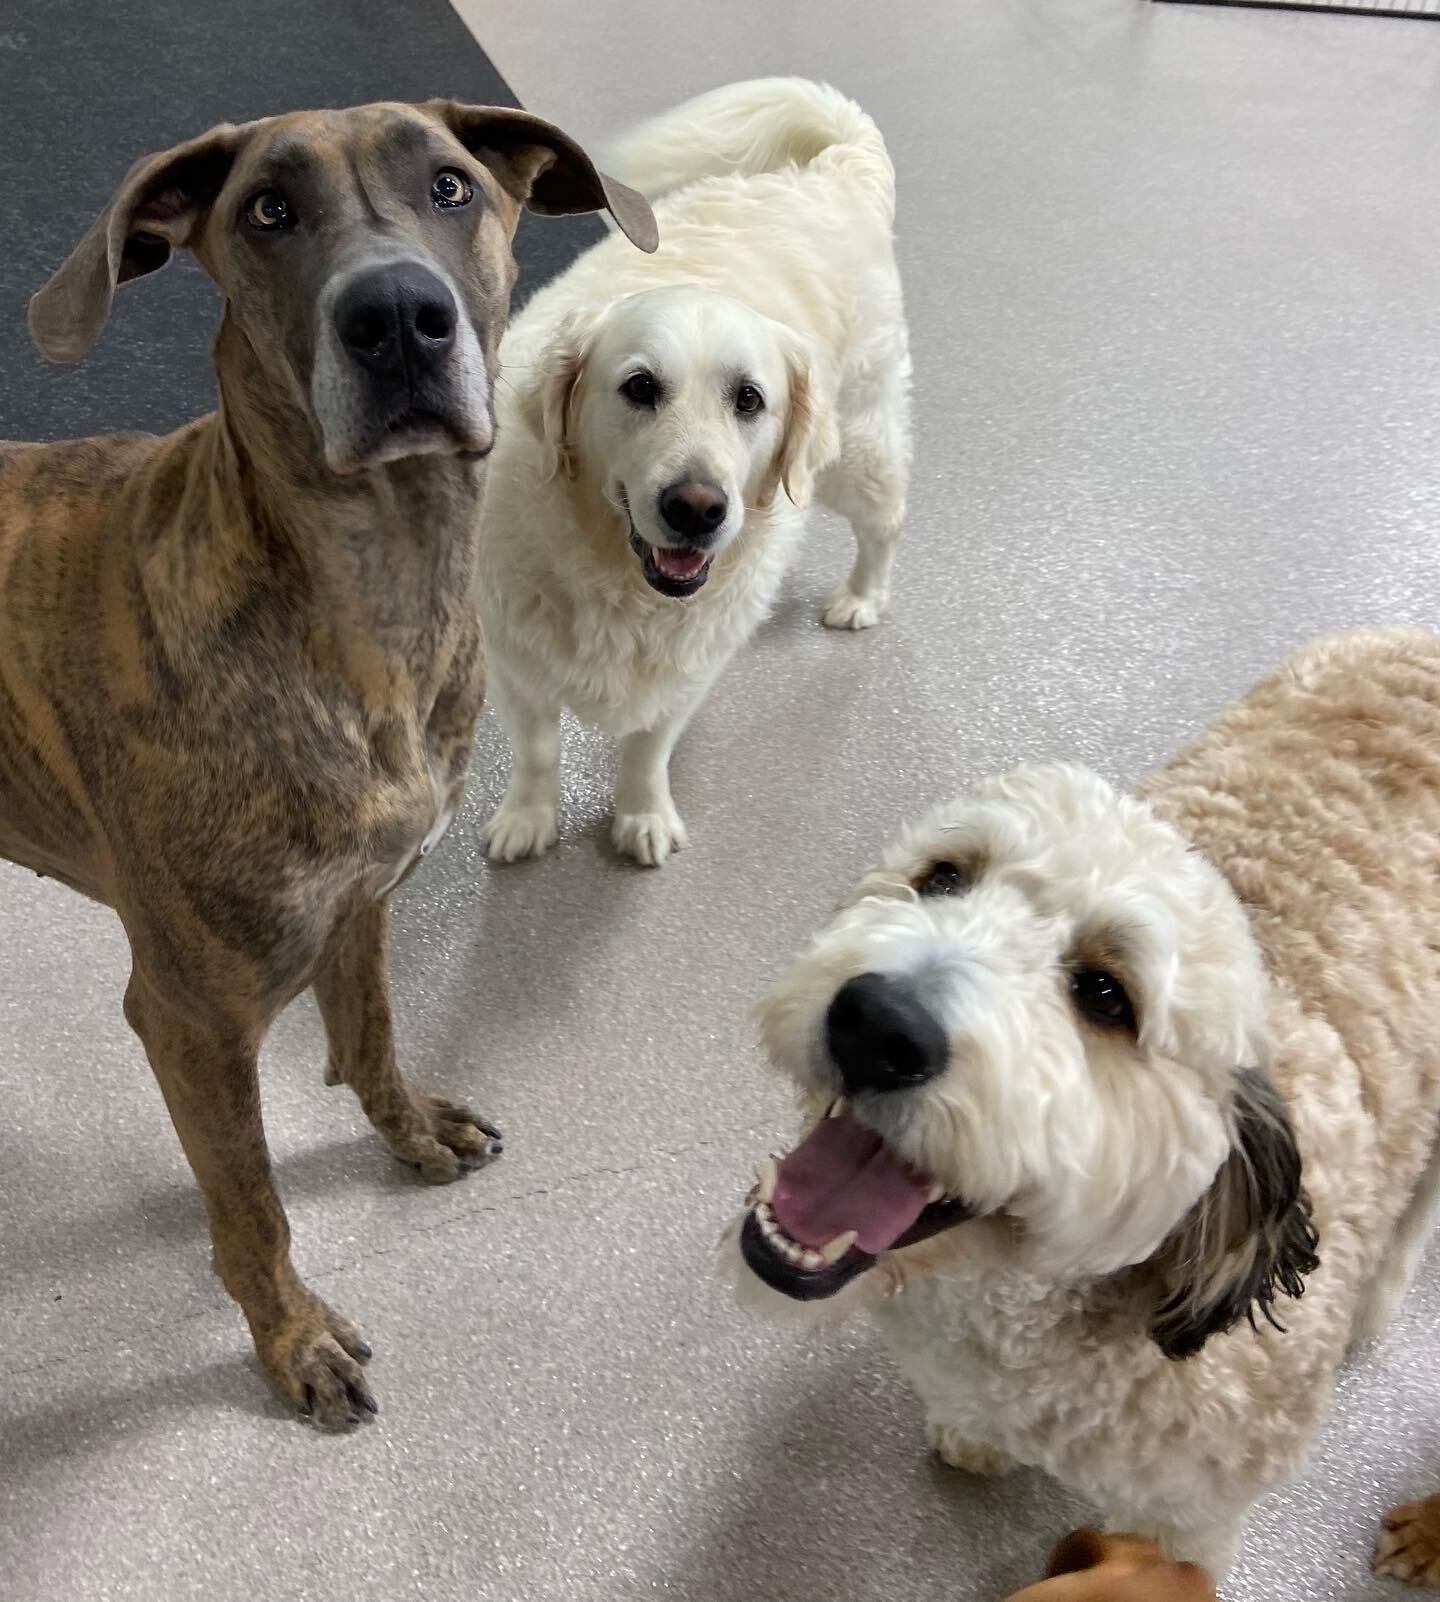 ☯️🐾 Between playing in the cold snow quickly and then warming up with friends in the gym, our Saturday dogs had a great day!
.
.
.
.
.
.
#saturdaysareforthedogs #zendogscenter #waunakeewi #rufferee #doggiedaycare #dogsofinstagram #dogsofmadison #dog